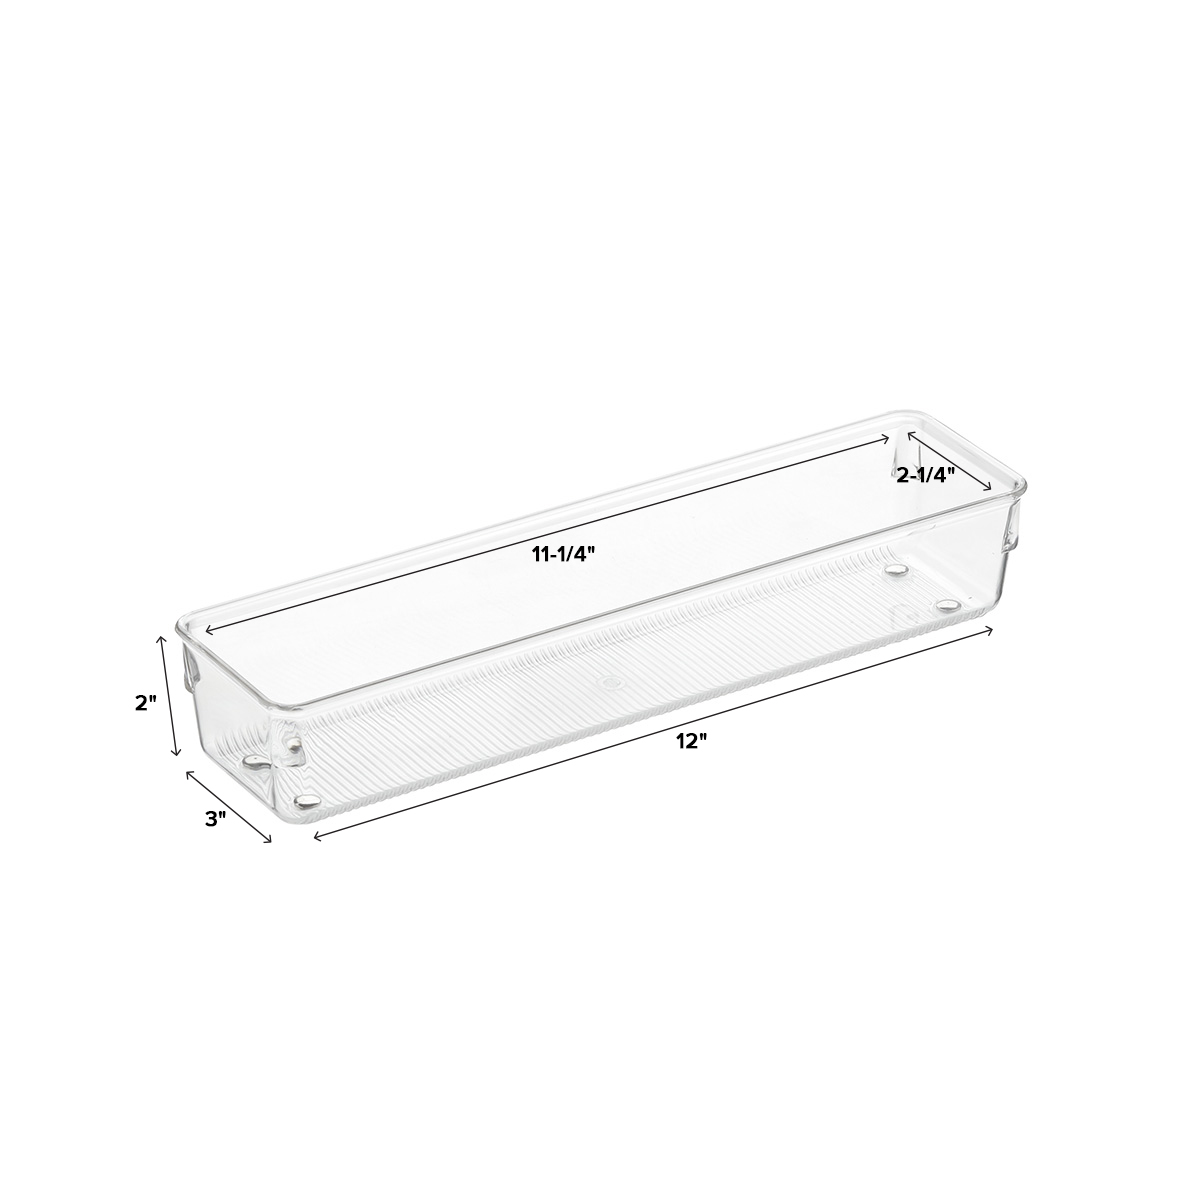 https://www.containerstore.com/catalogimages/445584/10037079-linus-shallow-drawer-organi.jpg